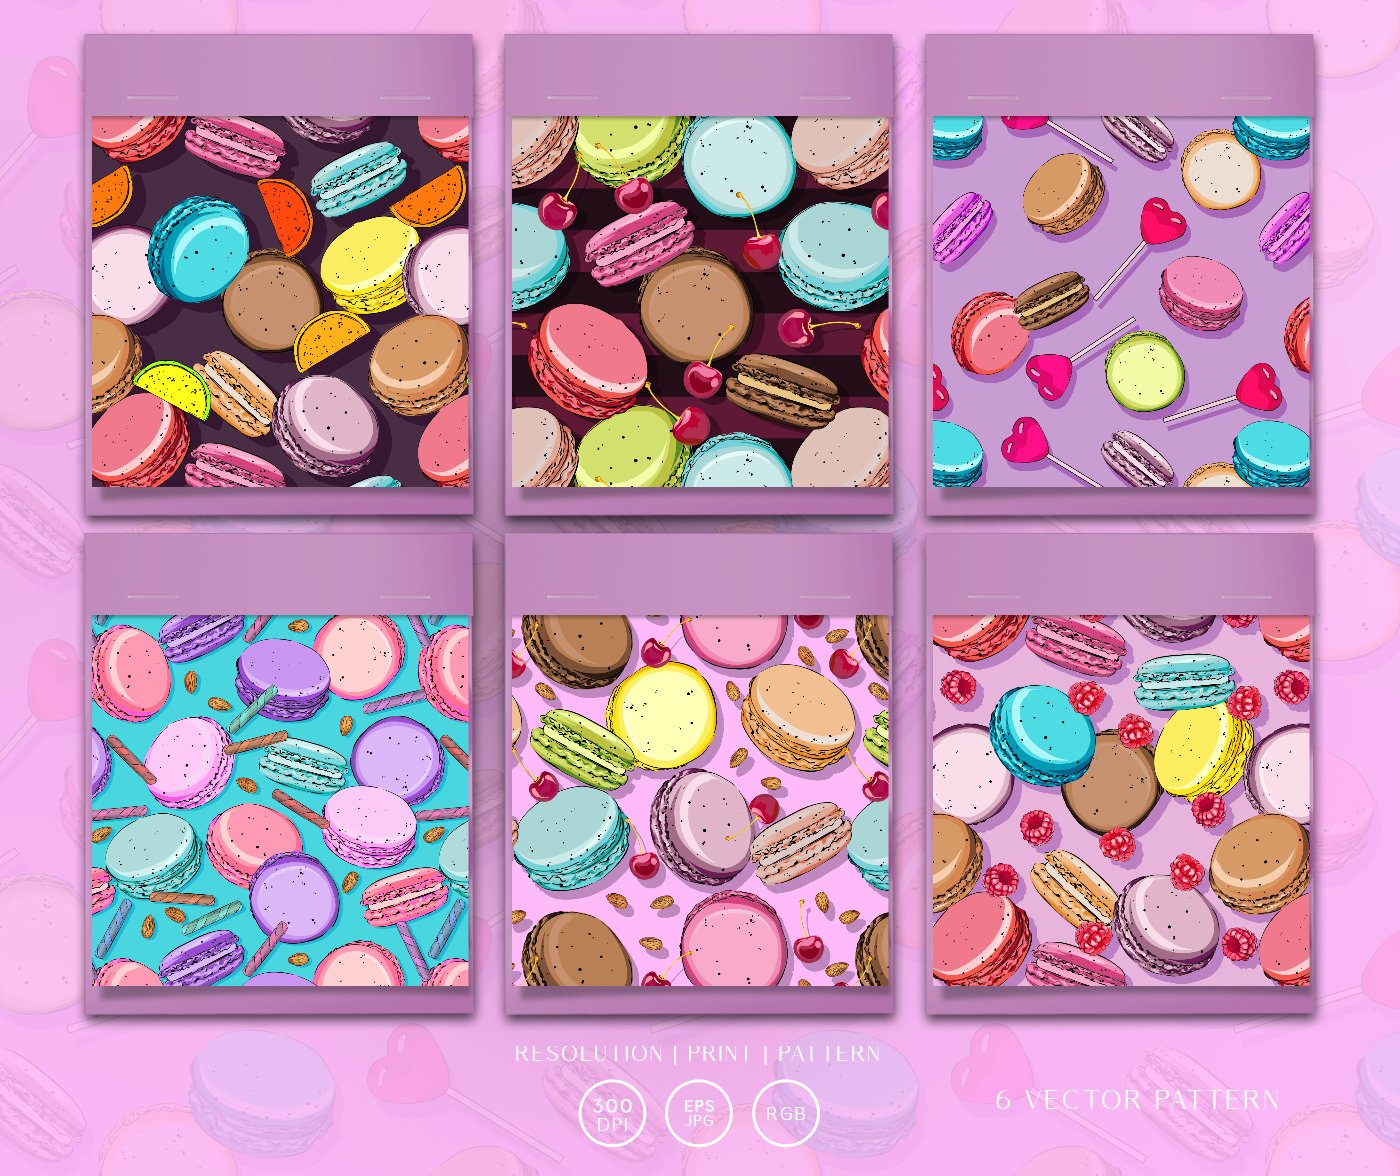 Vector patterns. Macaron, sweets preview image.